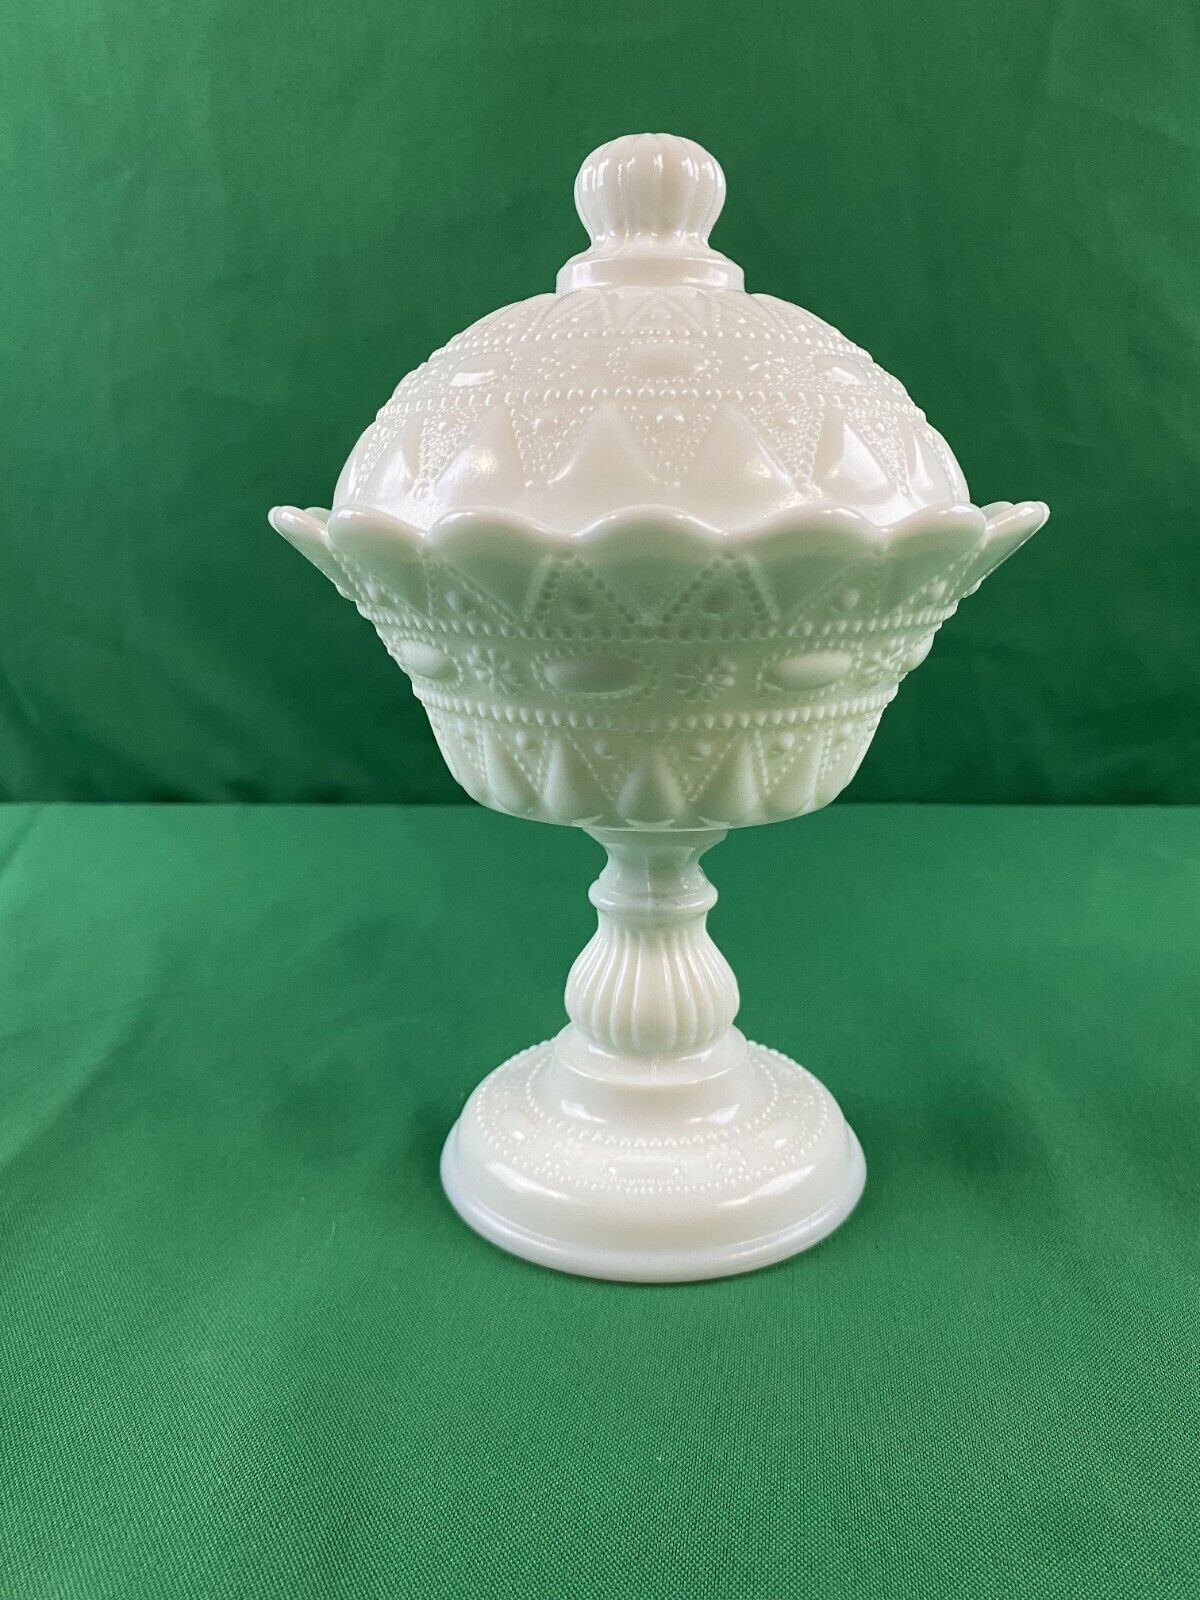 KEMPEL White Milk Glass Lace and Dewdrops Pedestal Covered CANDY DISH Compote